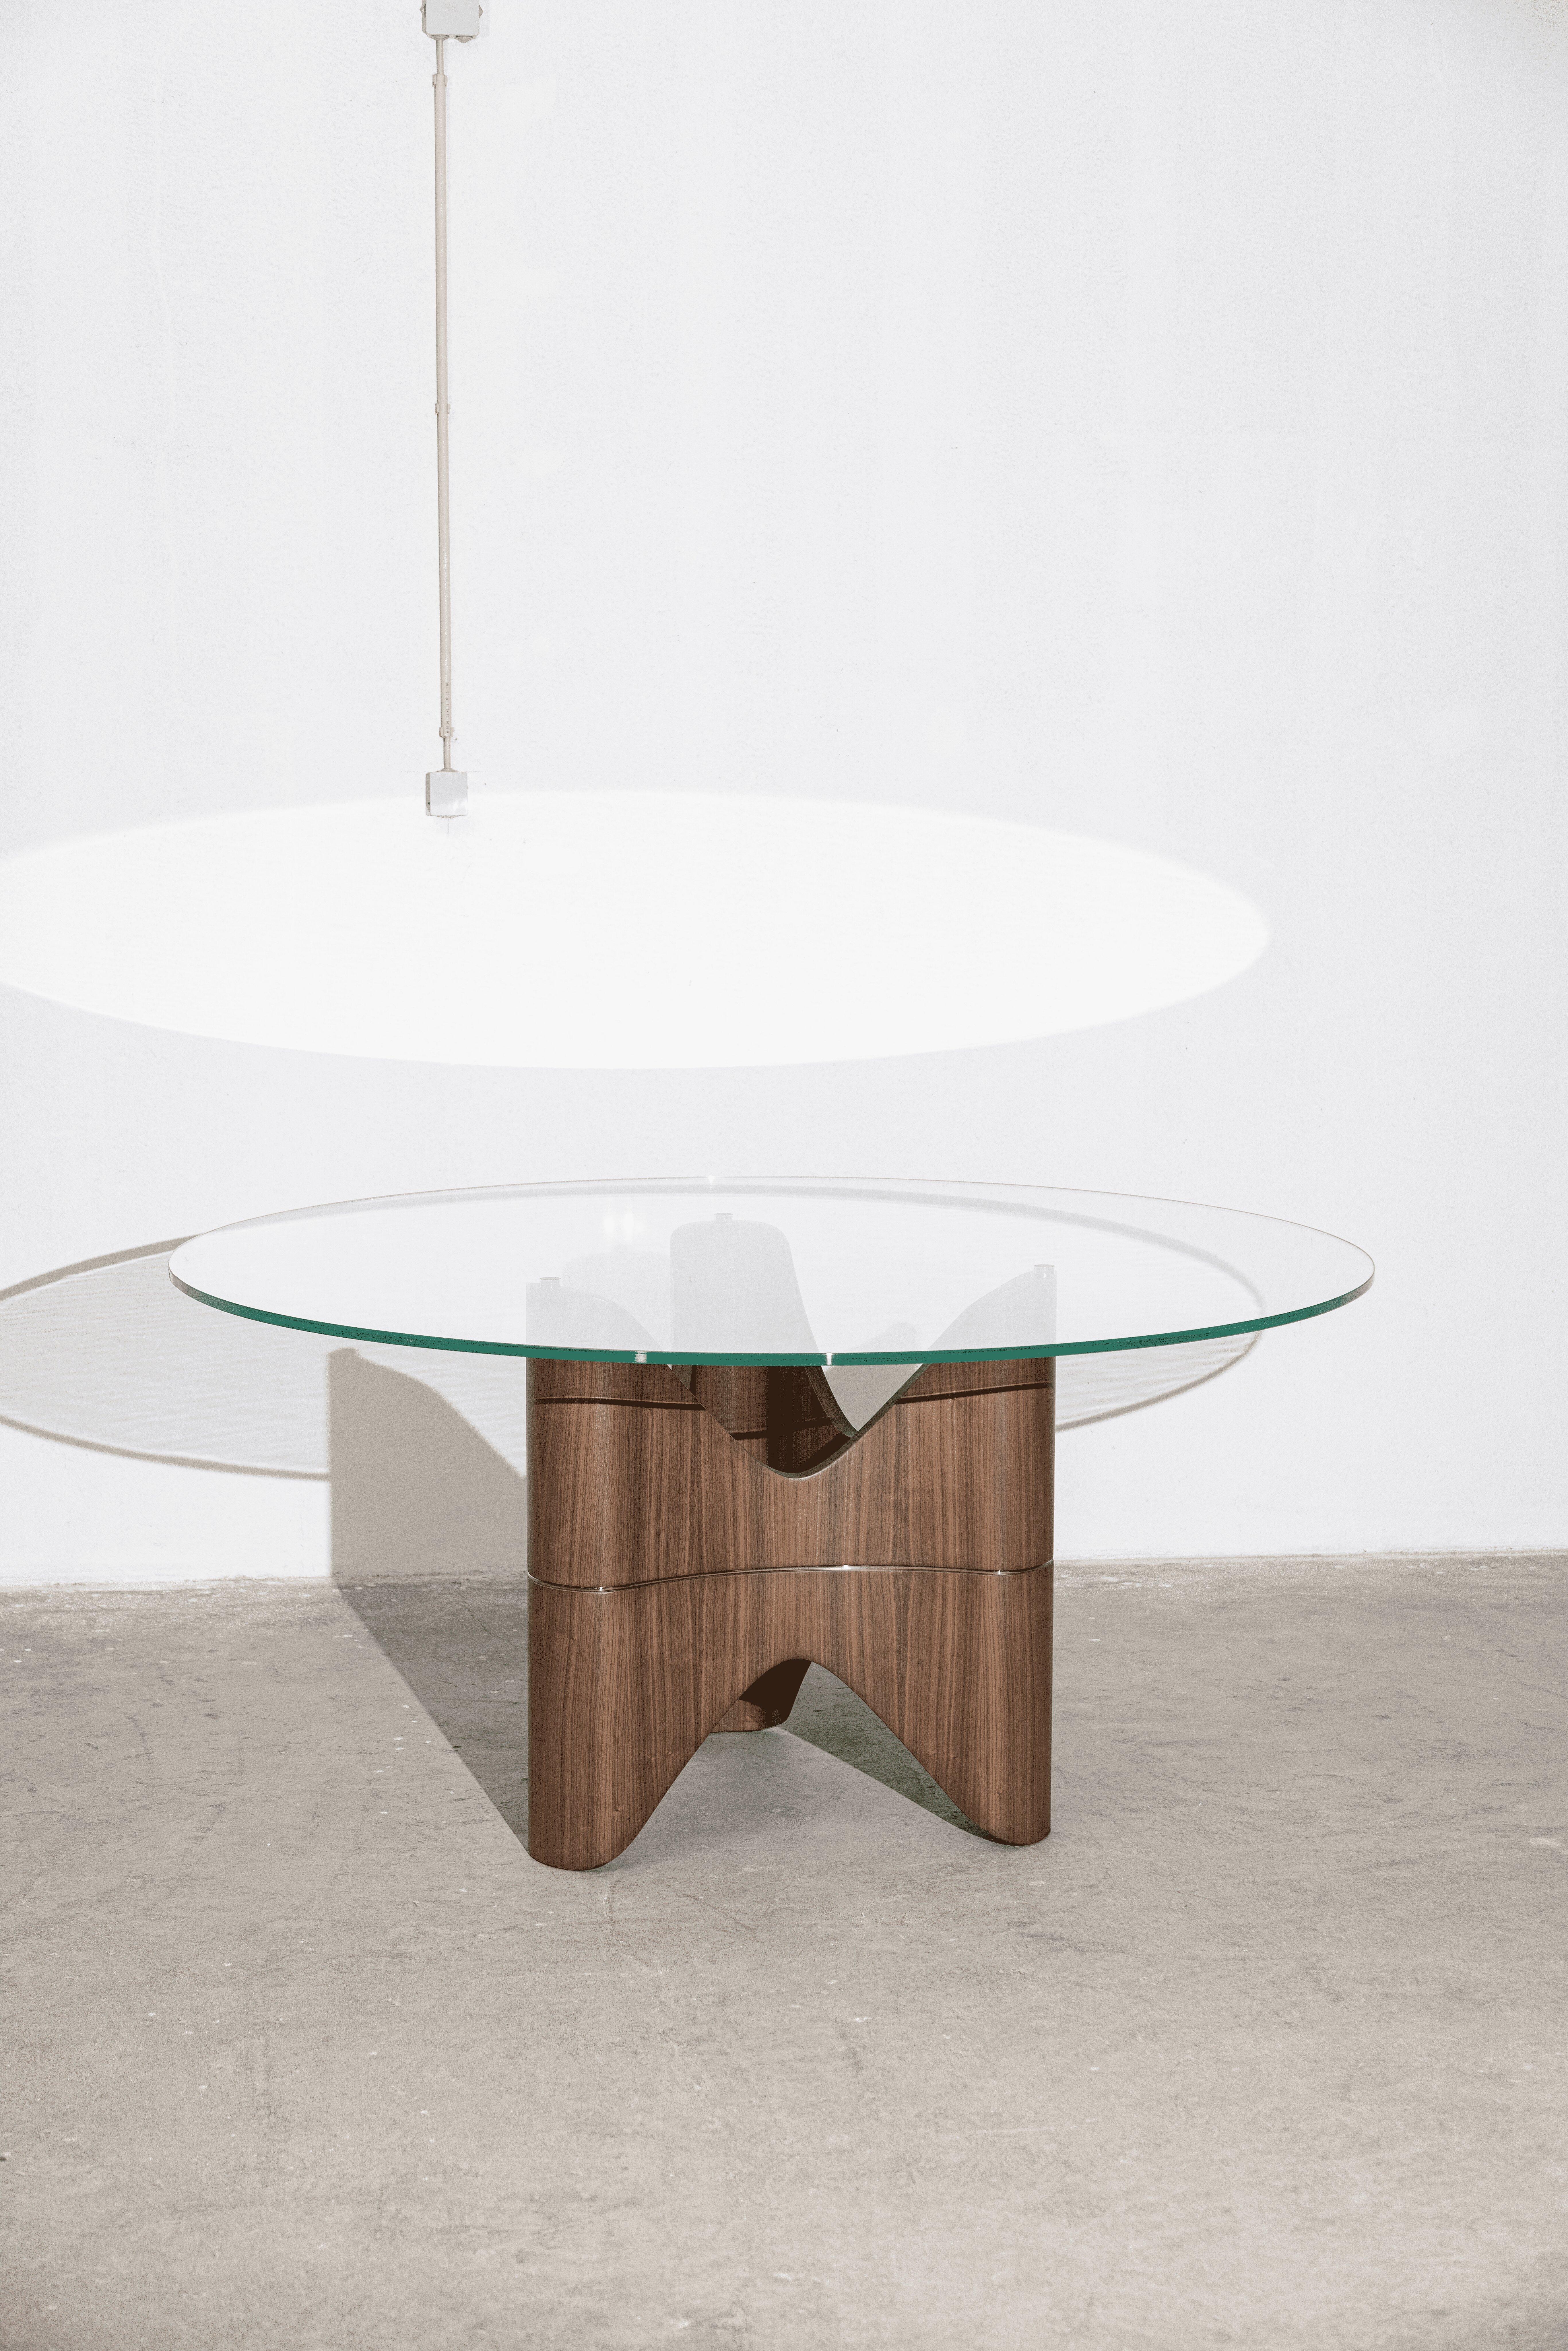 Like a shoot sprouting from the ground, so was born the inspiration for the imposing NATURA dining table. Its inspiration is based in nature, but in an almost literal way, with its base resembling a tree trunk. A combination of noble materials and